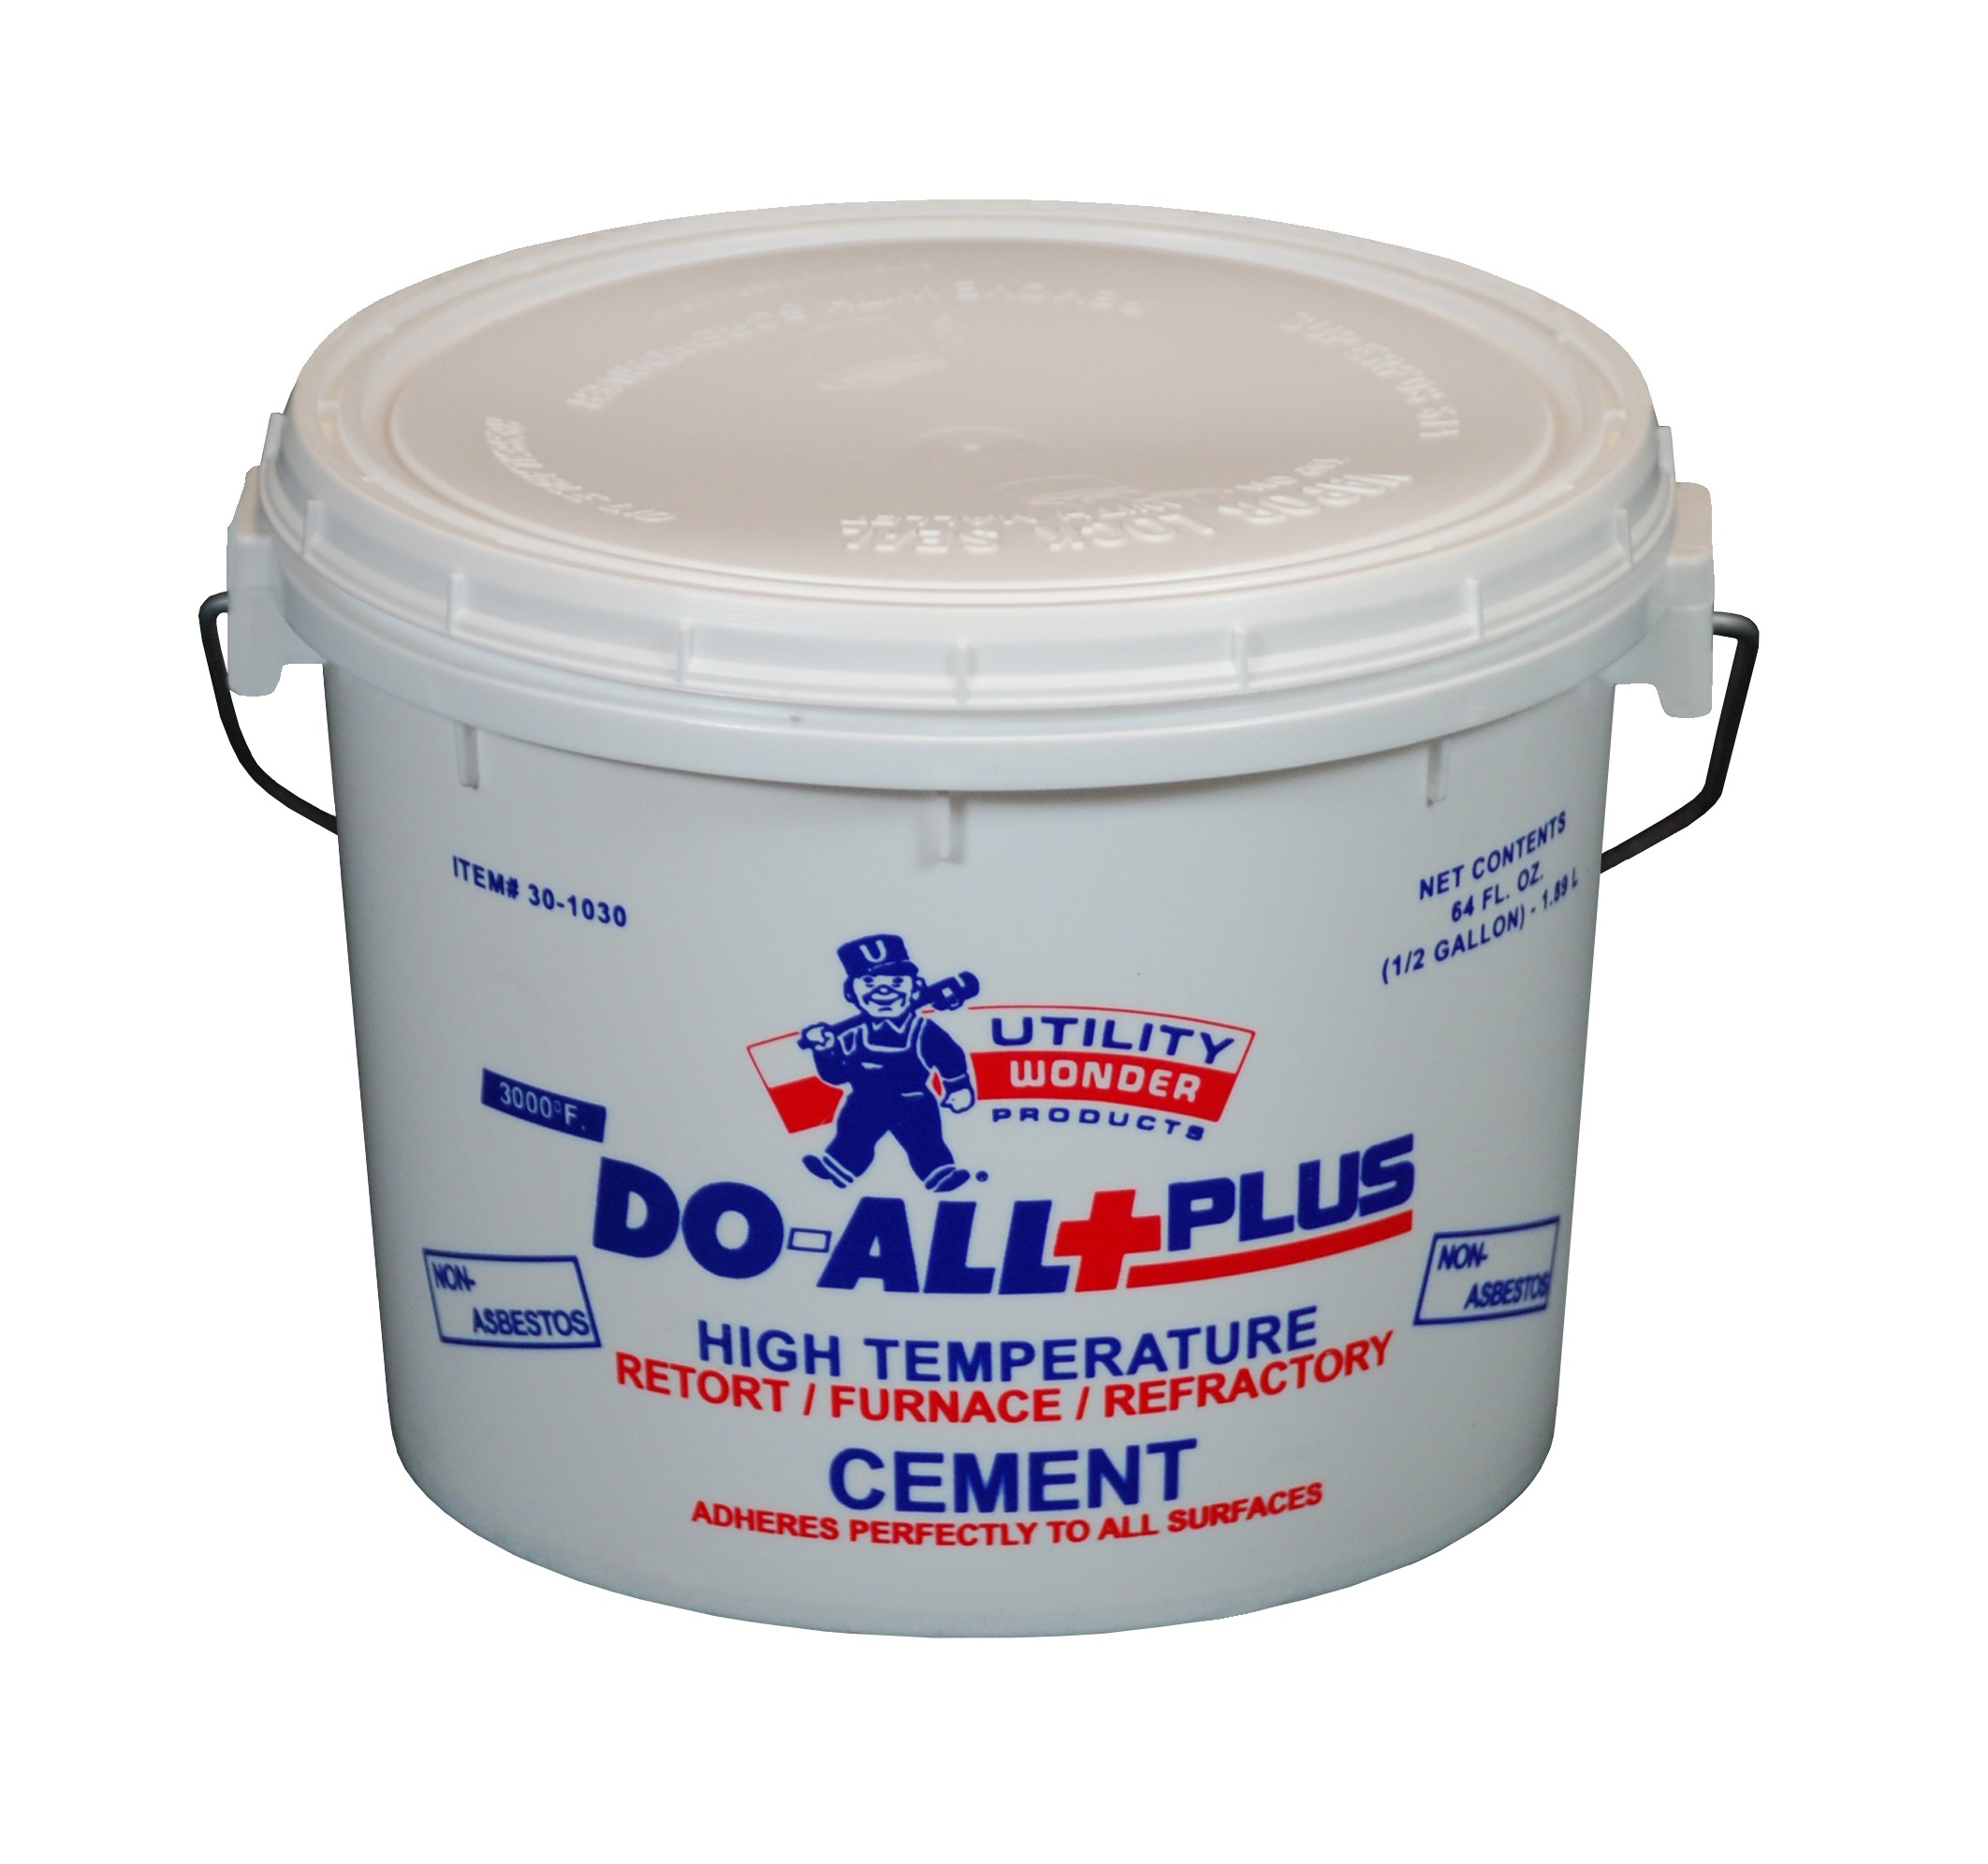 DO-ALL+PLUS FURNACE/ REFRACTORY/ RETORT & STOVE CEMENT